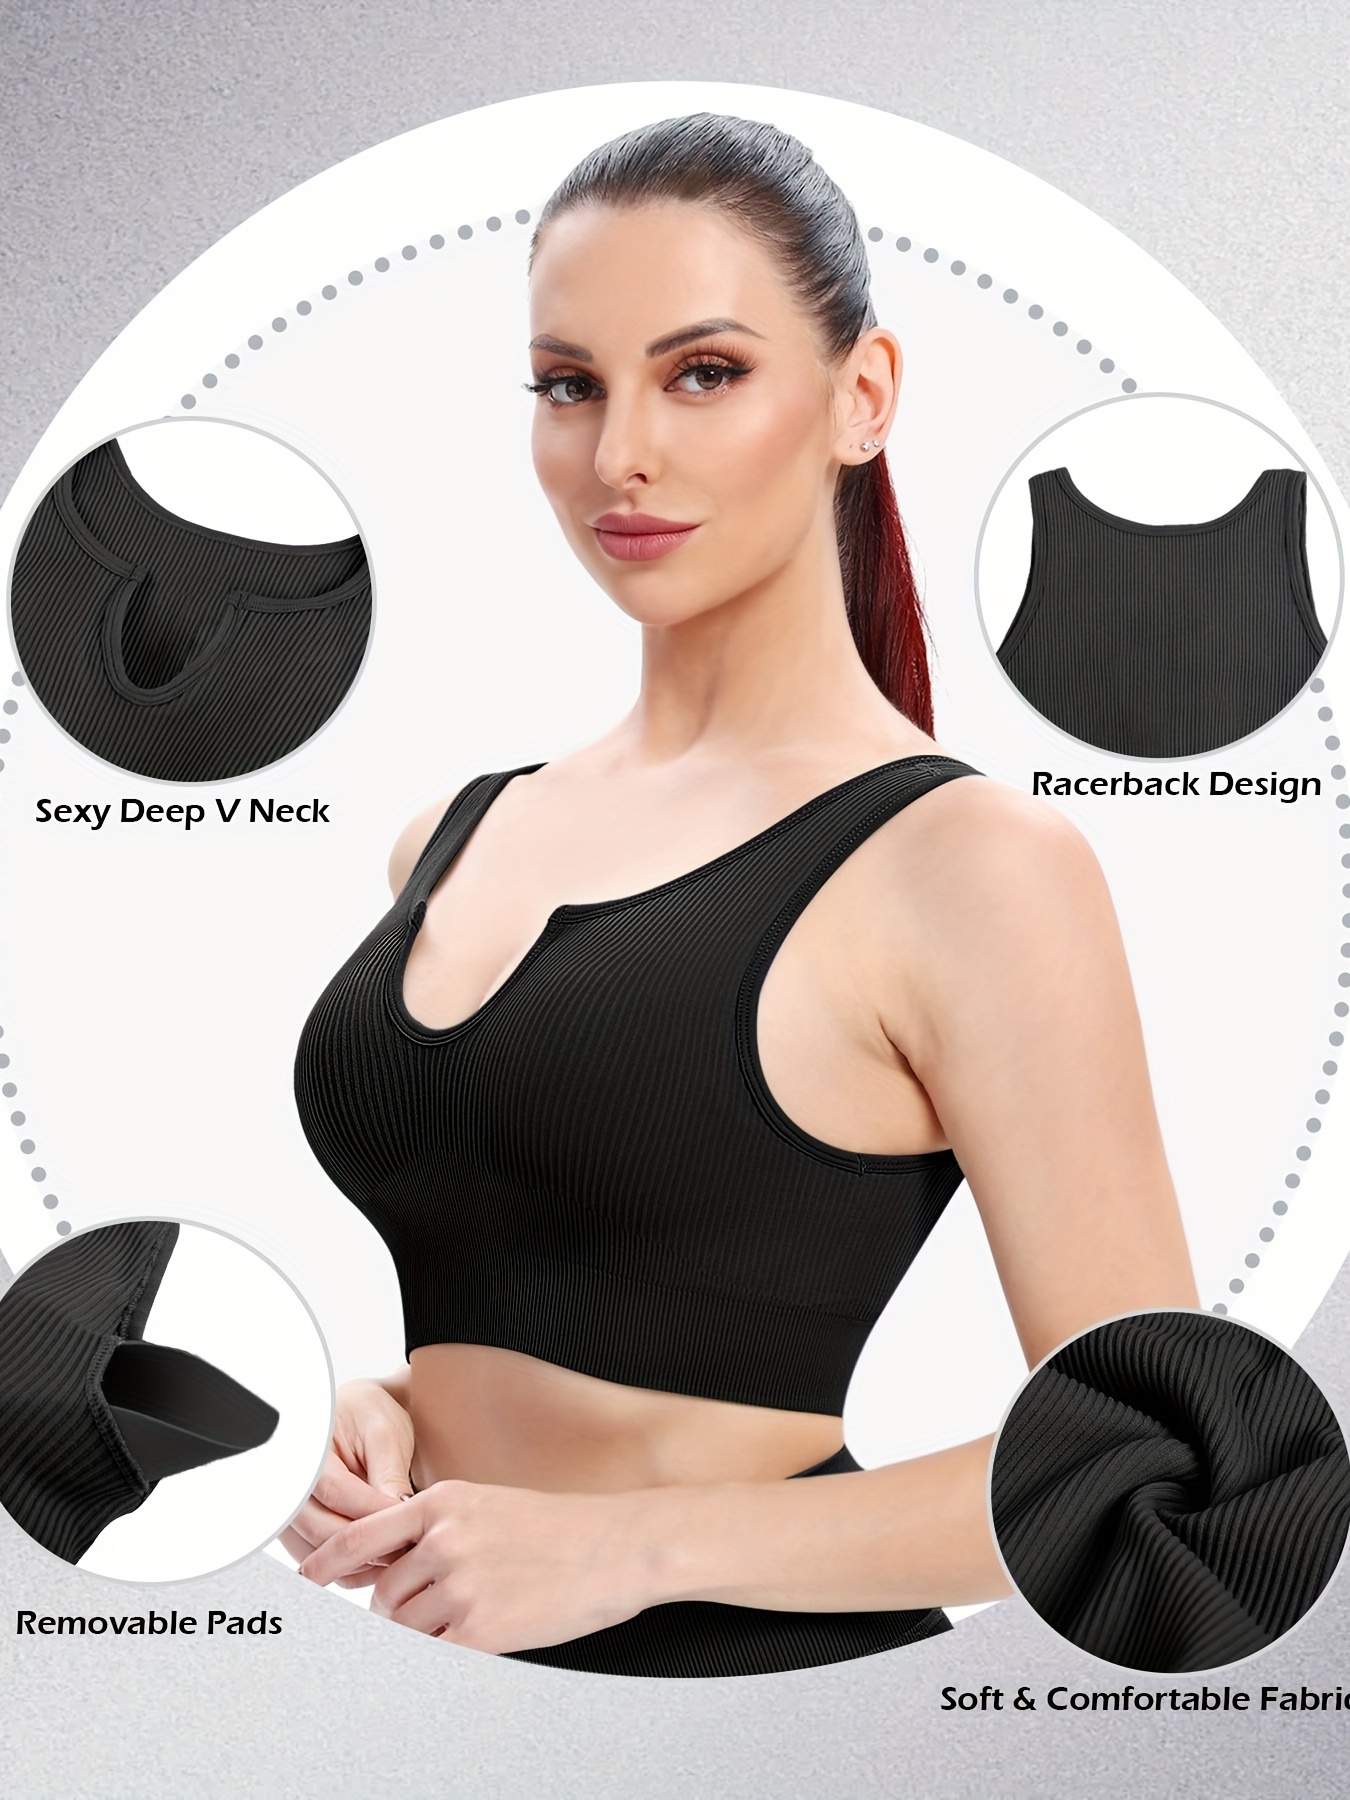 Medium Impact Sports Bra - Racer Back Removable Pads Wirefree